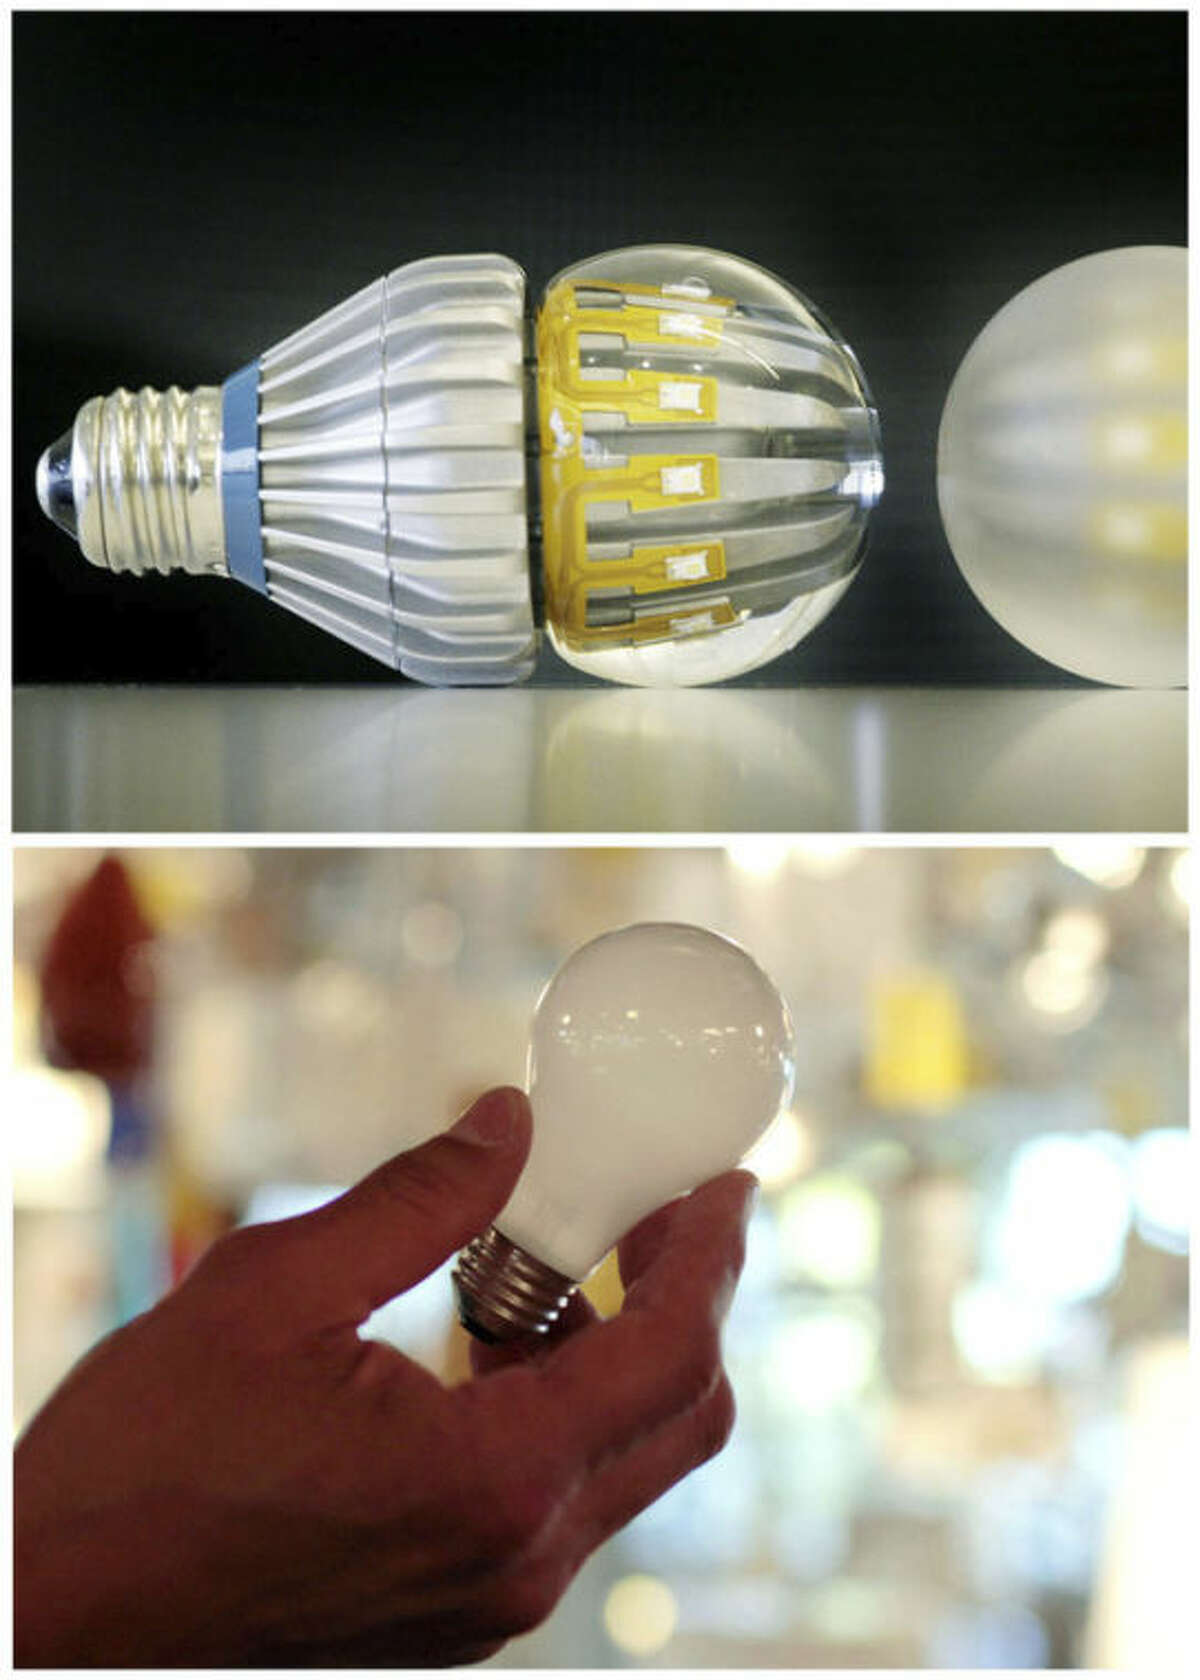 FILE -This combination of Associated Press file photos shows, top, Switch75 light LED bulbs in clear and frosted, on Tuesday, Nov. 8, 2011 in New York and a 100-watt incandescent light bulb at Royal Lighting in Los Angeles on Jan. 21, 2011. LEDs use 70 percent to 80 percent less power than incandescent light bulbs. According to the Energy Department, widespread use of LED bulbs could save the output of the equivalent of 44 large power plants by 2027. (AP Photo/File)